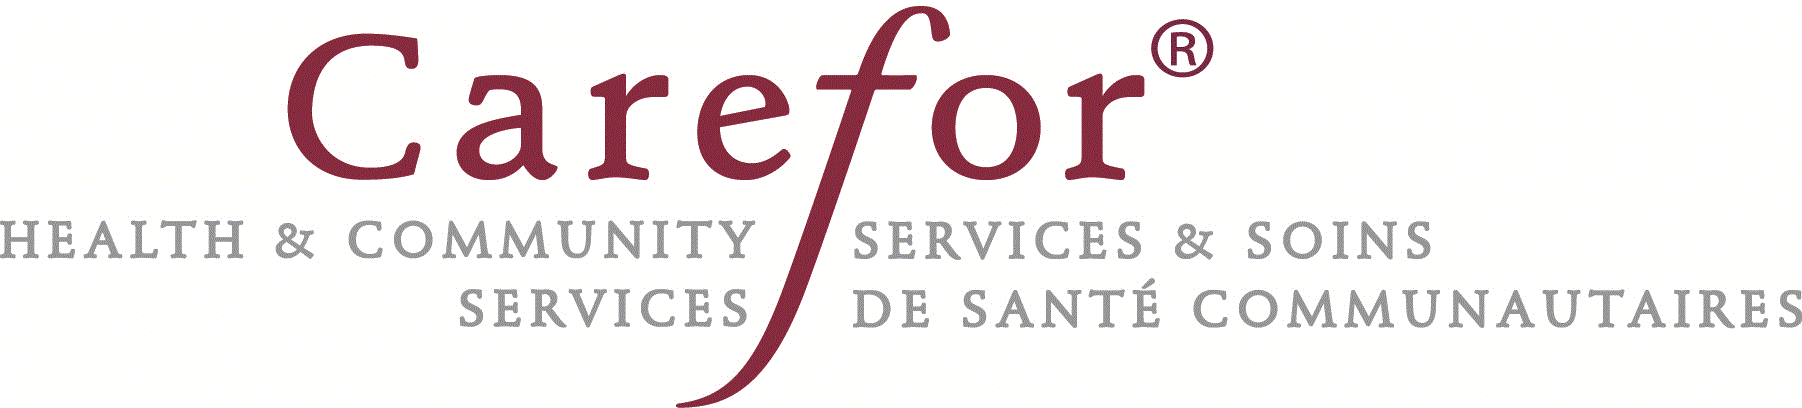 Carefor Health & Community Services accredited with Exemplary standing